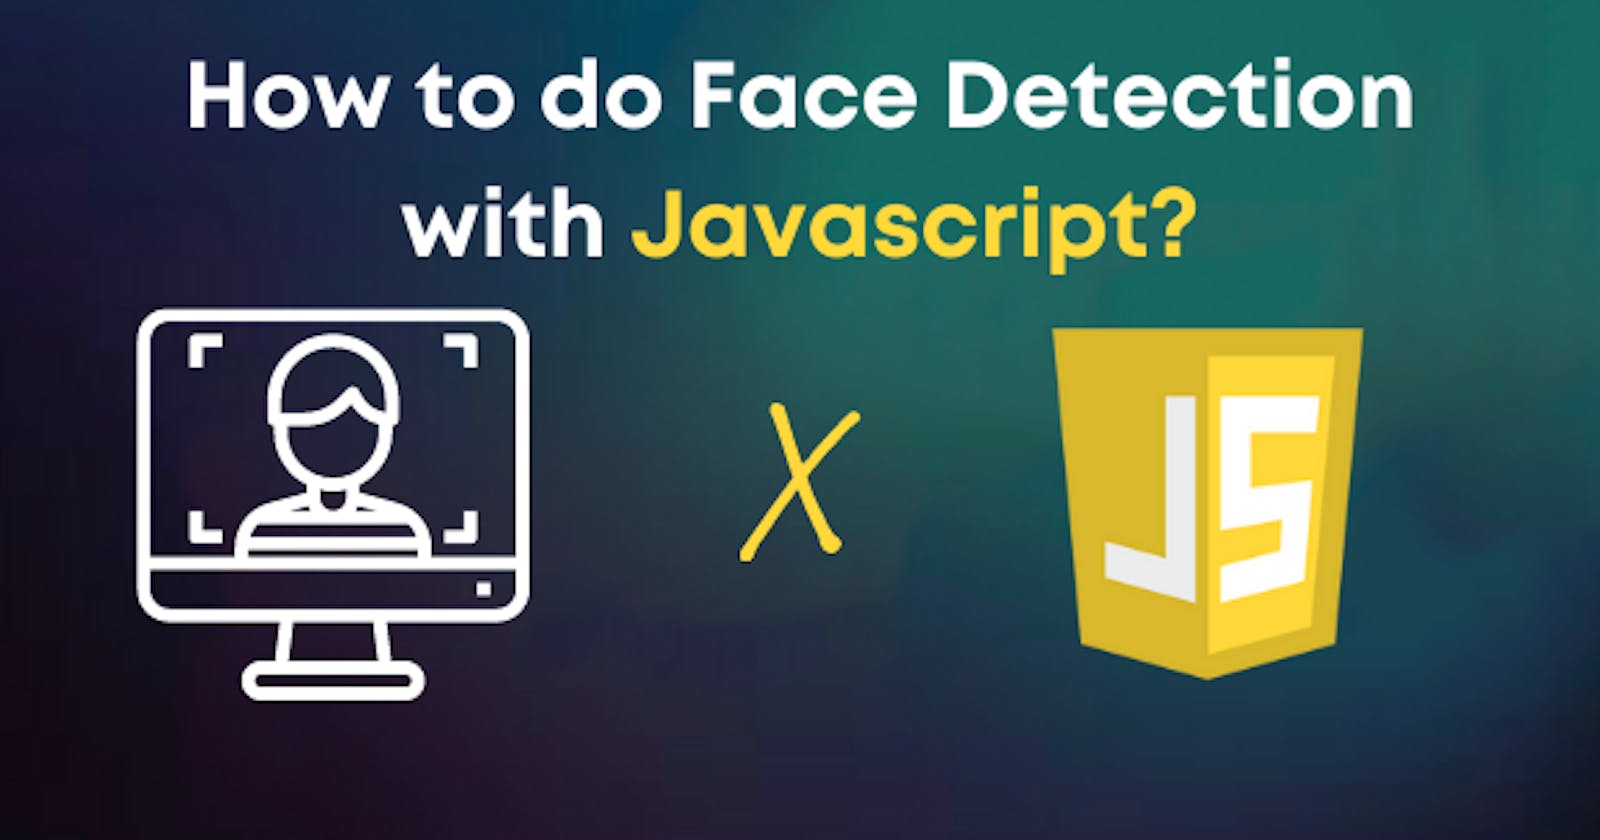 How to do Face Detection with JavaScript?